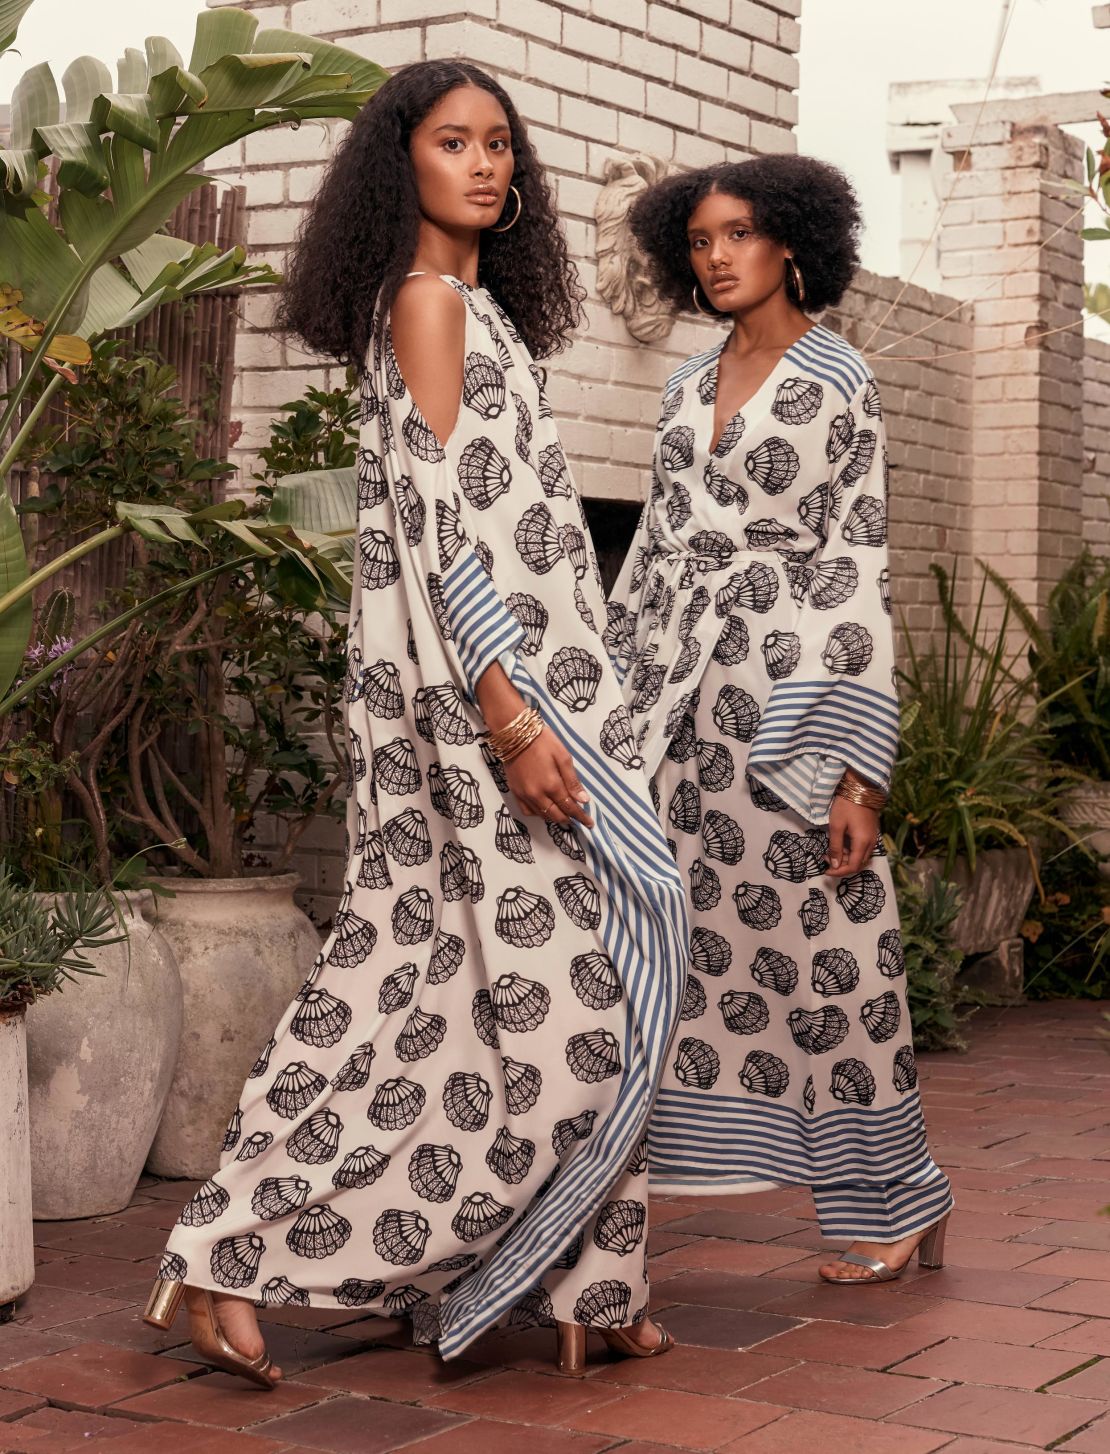 The Joal print is named after an iconic coastal town in Senegal called Joal Fadiouth.